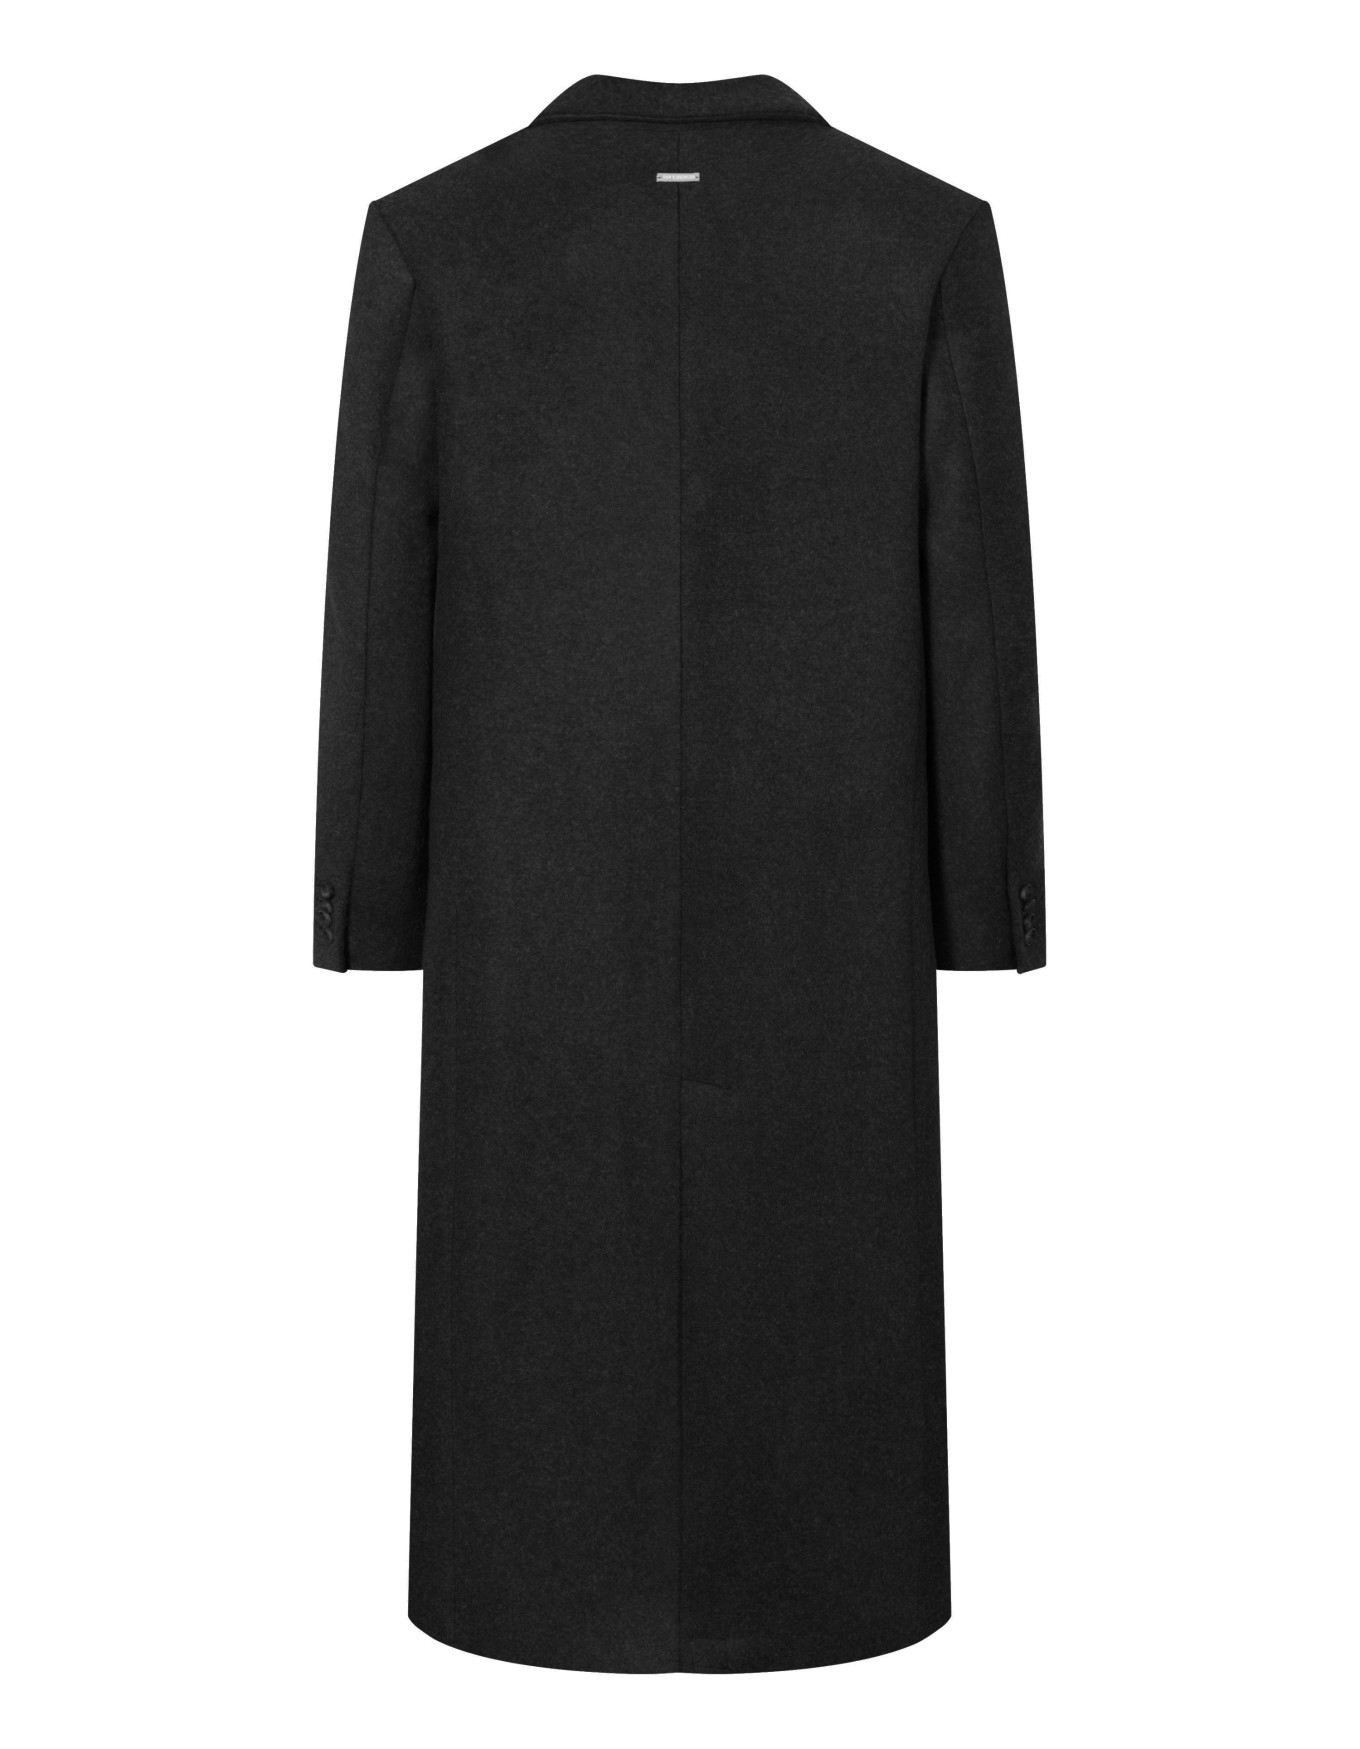 Wool Boxy Double Breasted Coat, Black image number 3